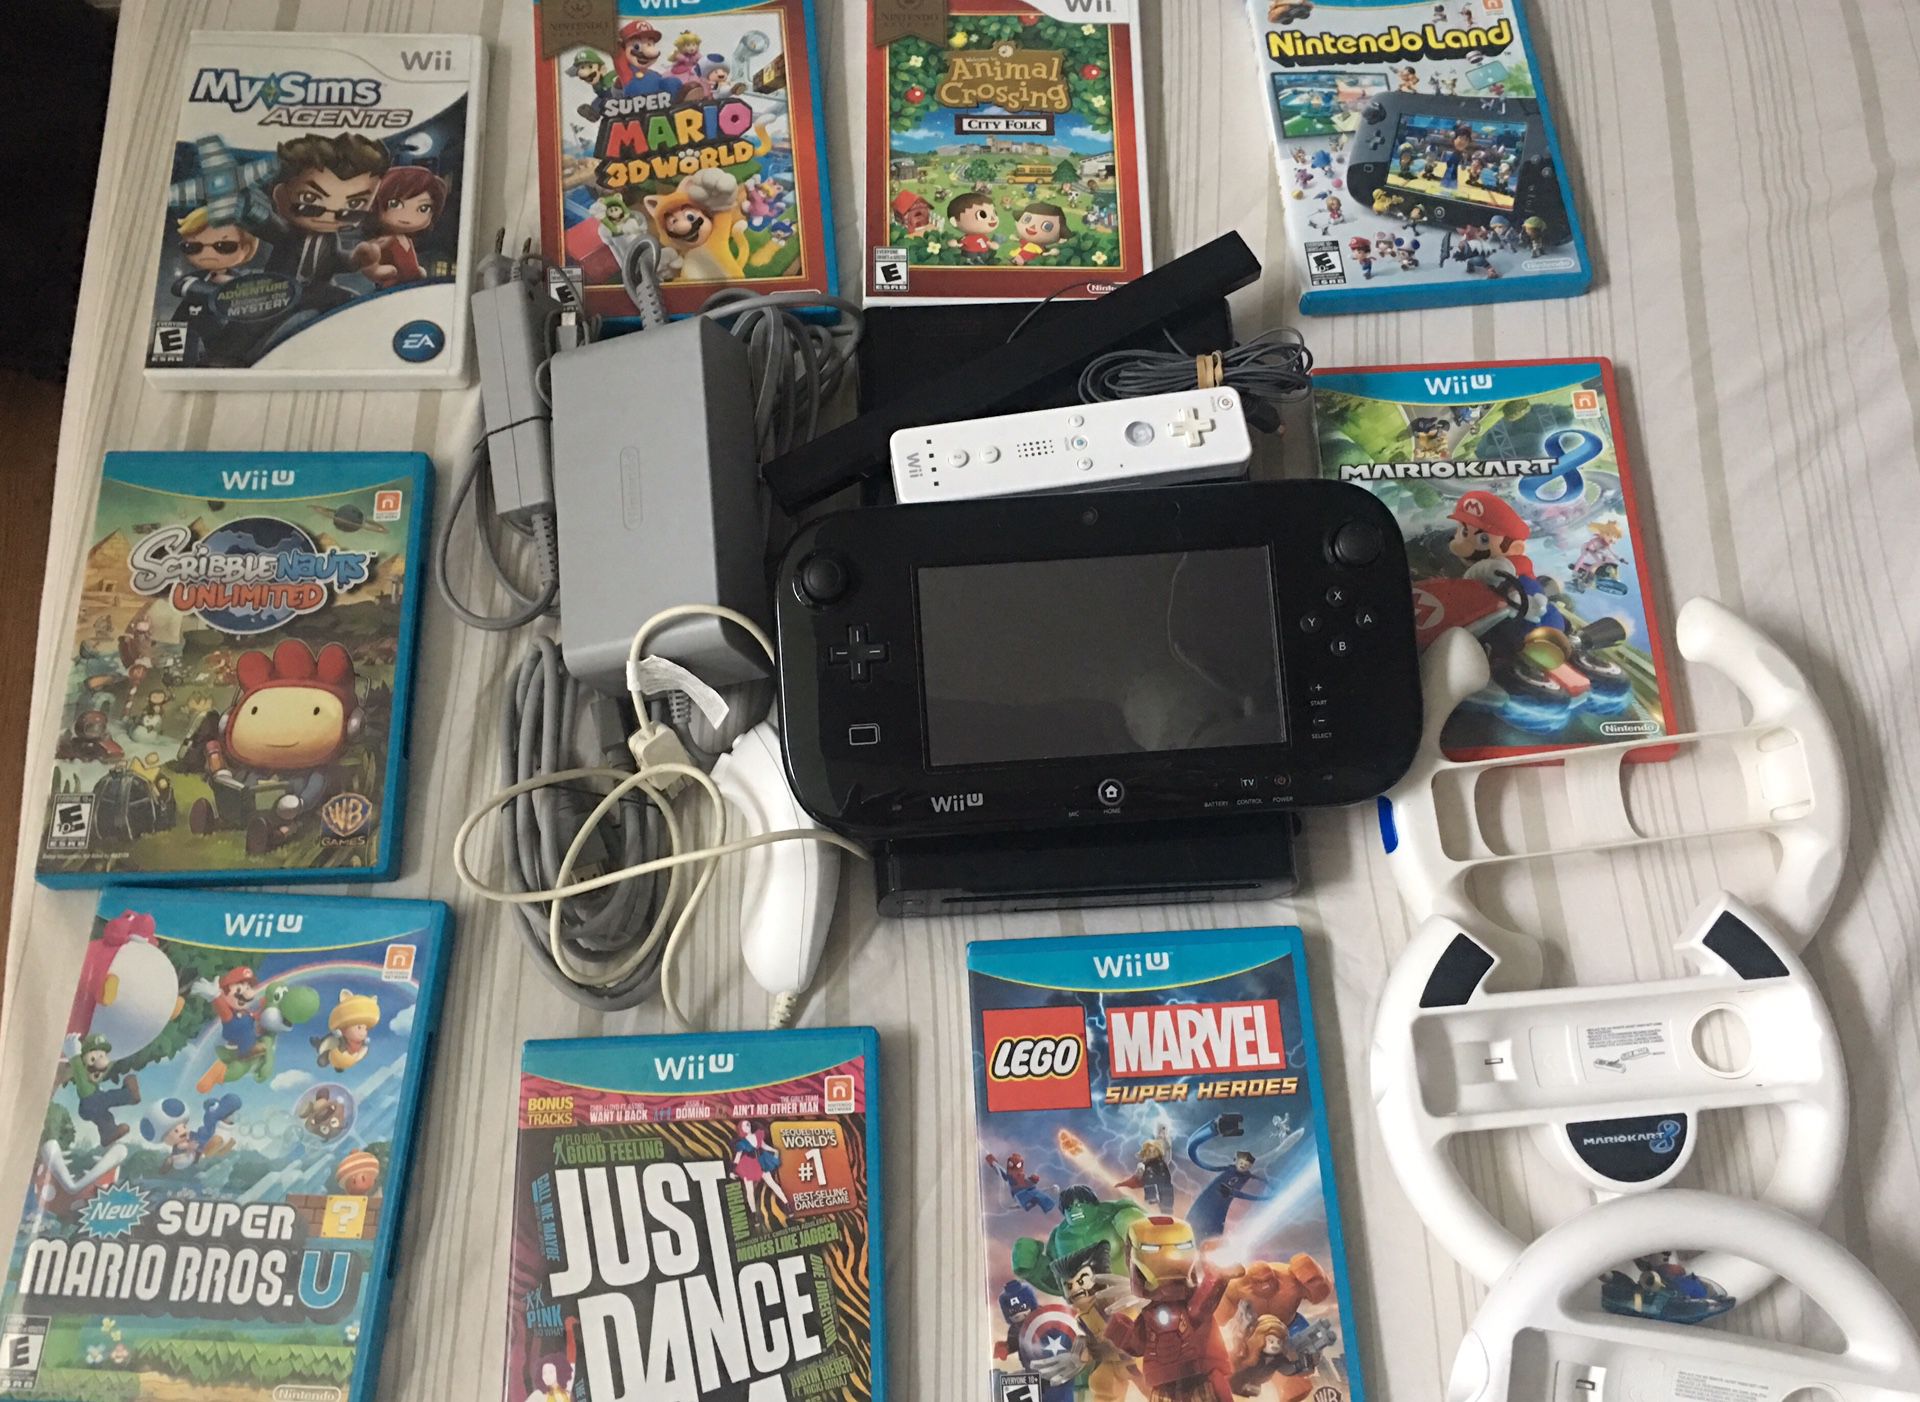 Nintendo Wii U plus all accessories in this picture